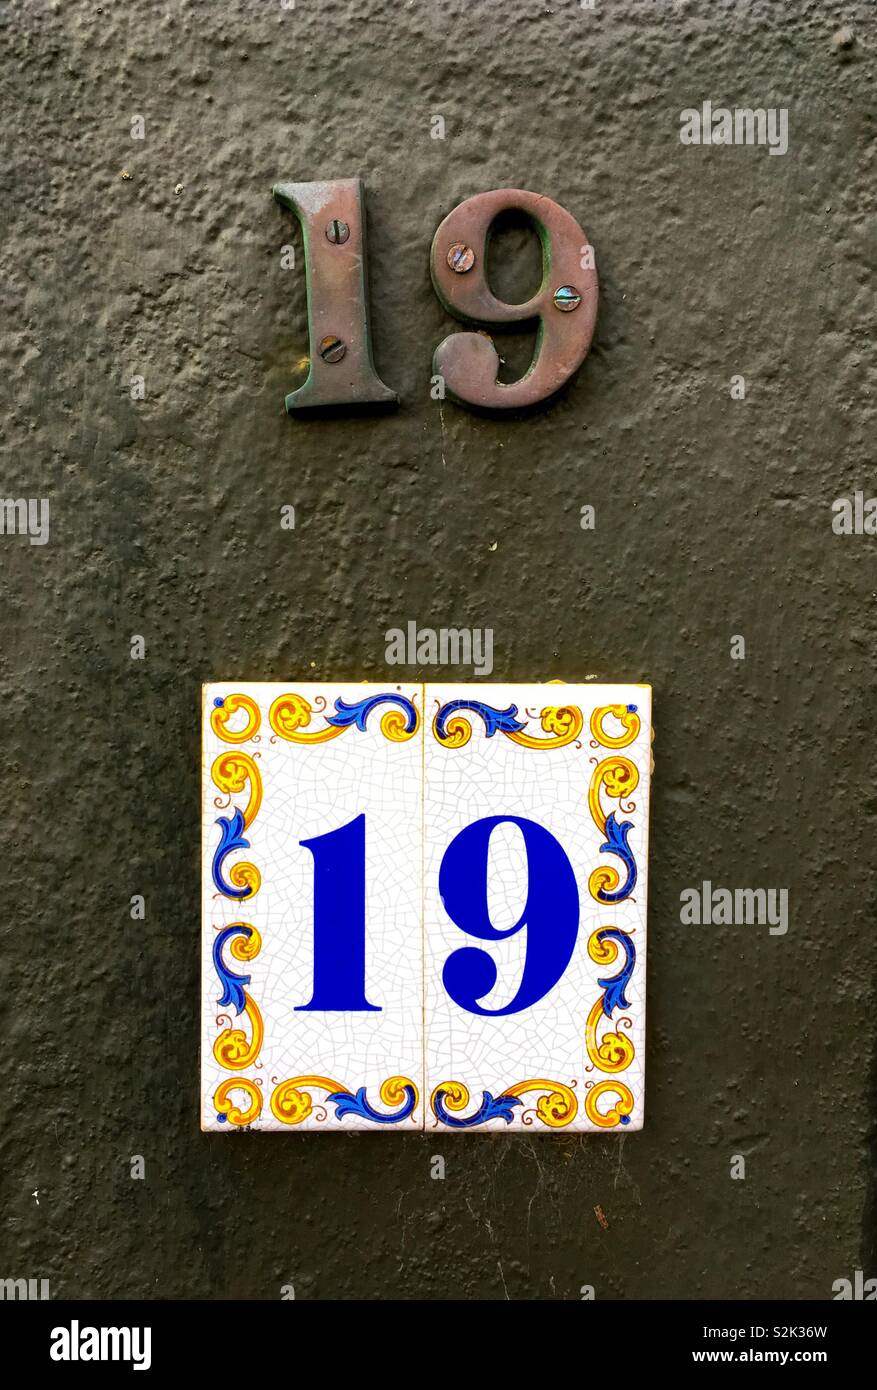 Number 19 in metal numerals and on a ceramic tile for the same house. Stock Photo